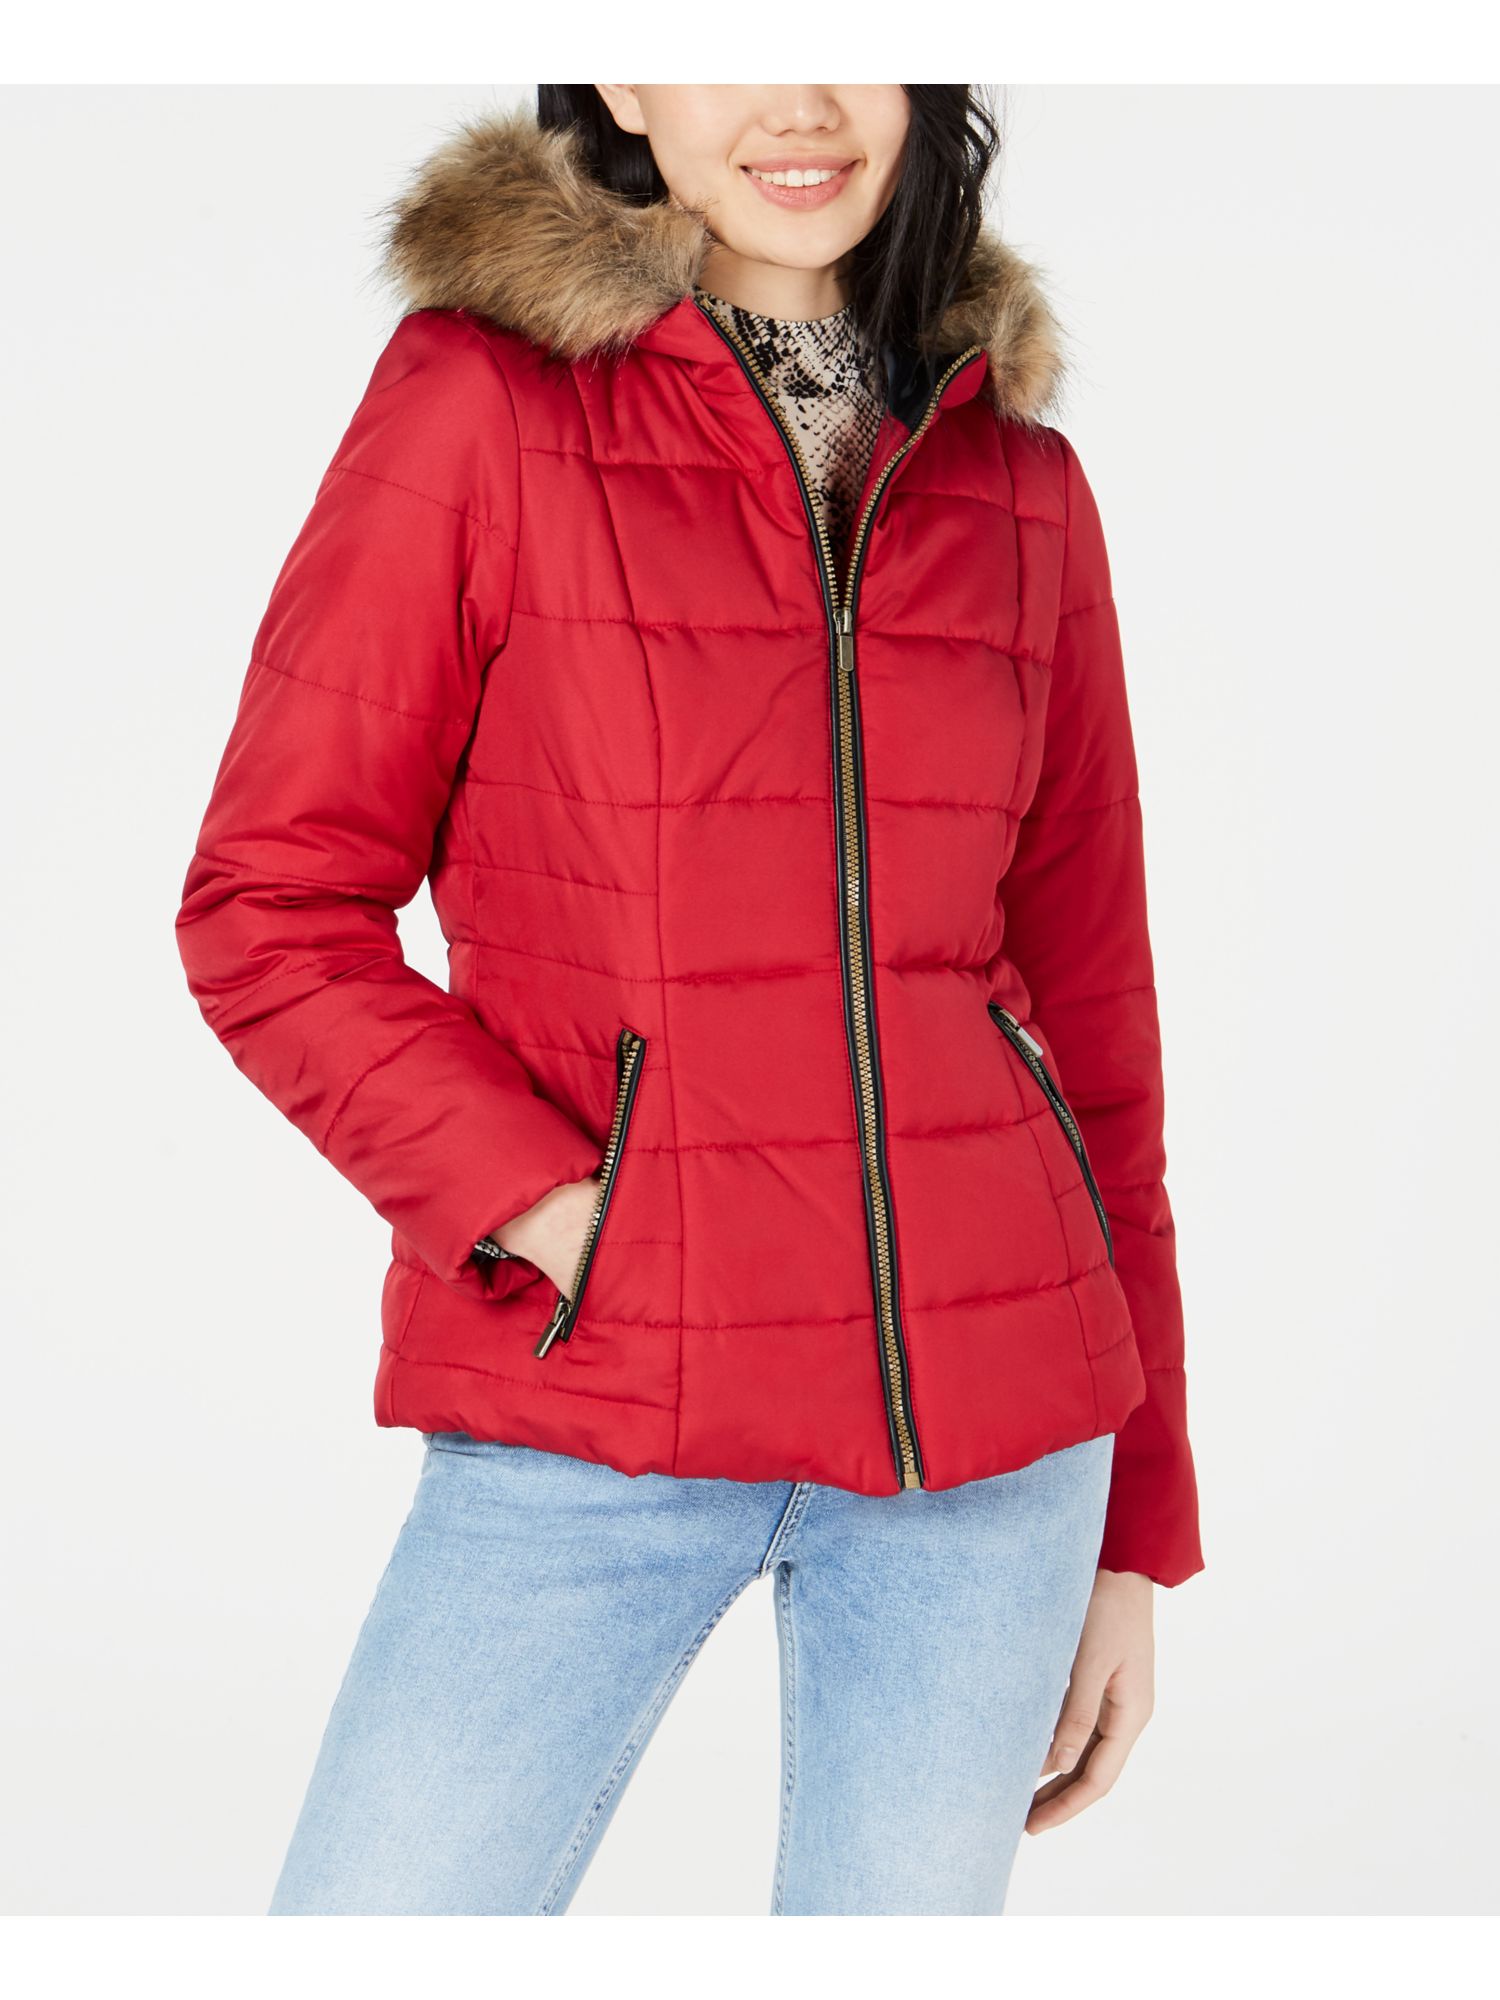 CELEBRITY PINK Womens Red Zippered Faux Fur Hood Lined Puffer Winter Jacket Coat Juniors M - image 1 of 2